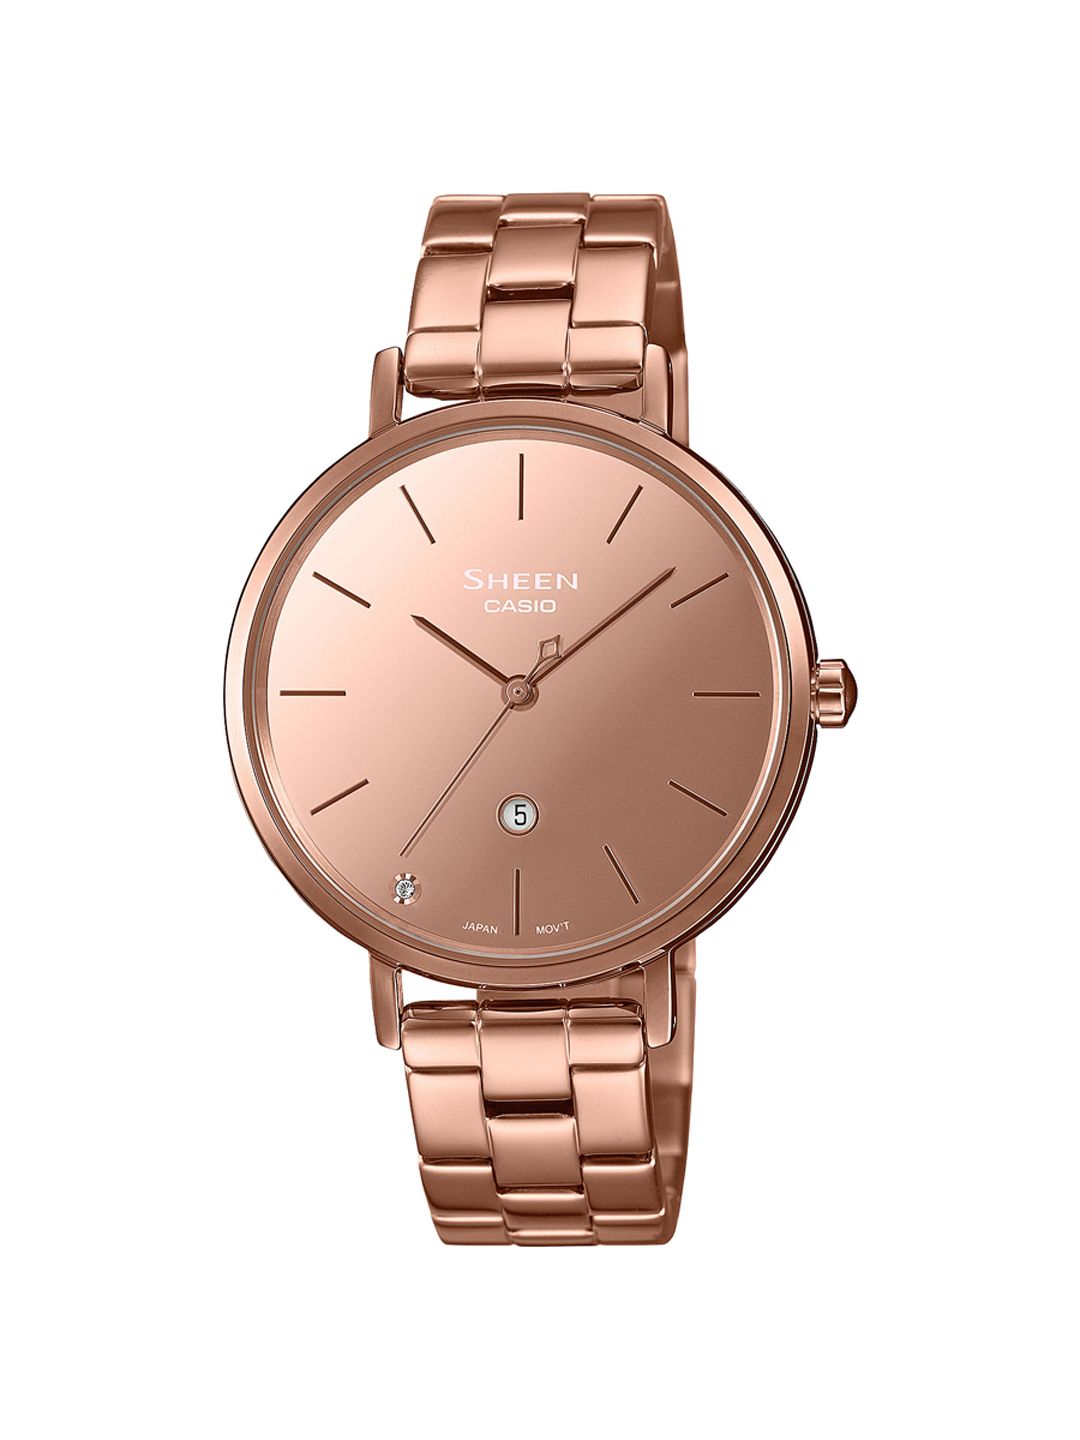 CASIO Women Rose Gold-Toned Dial & Rose Gold Toned Stainless Steel Straps Analogue Watch Price in India